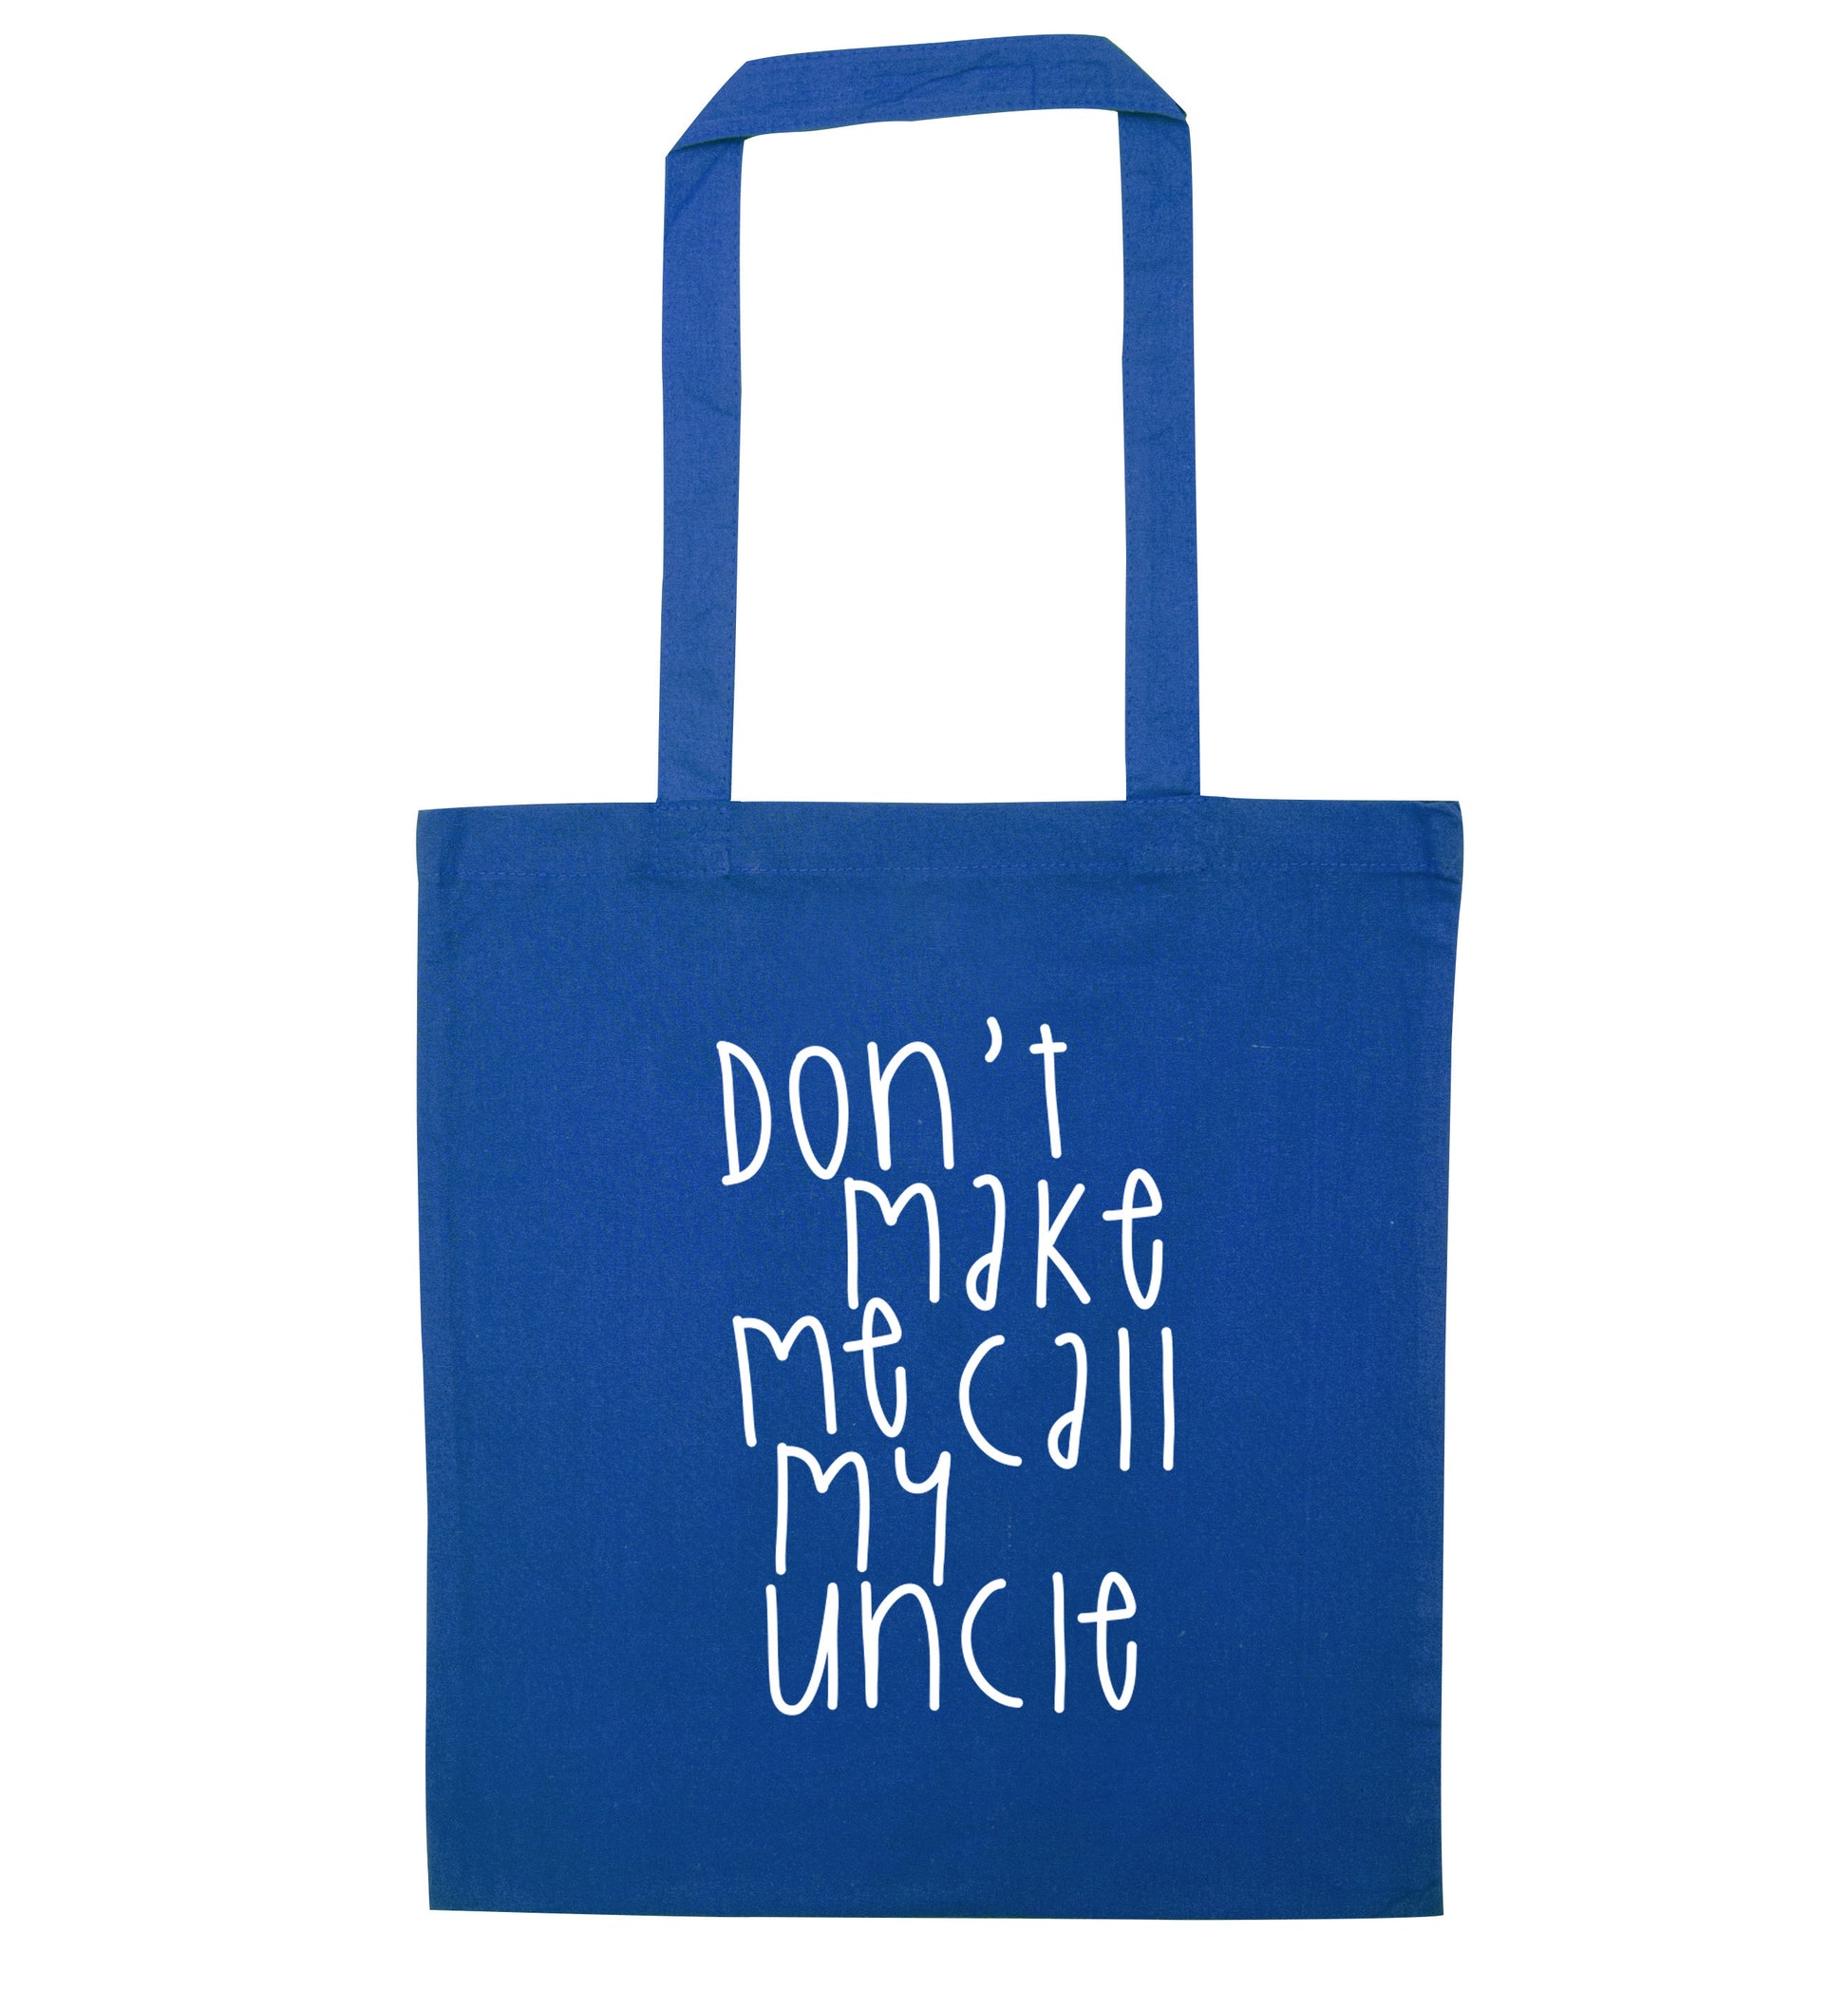 Don't make me call my uncle blue tote bag